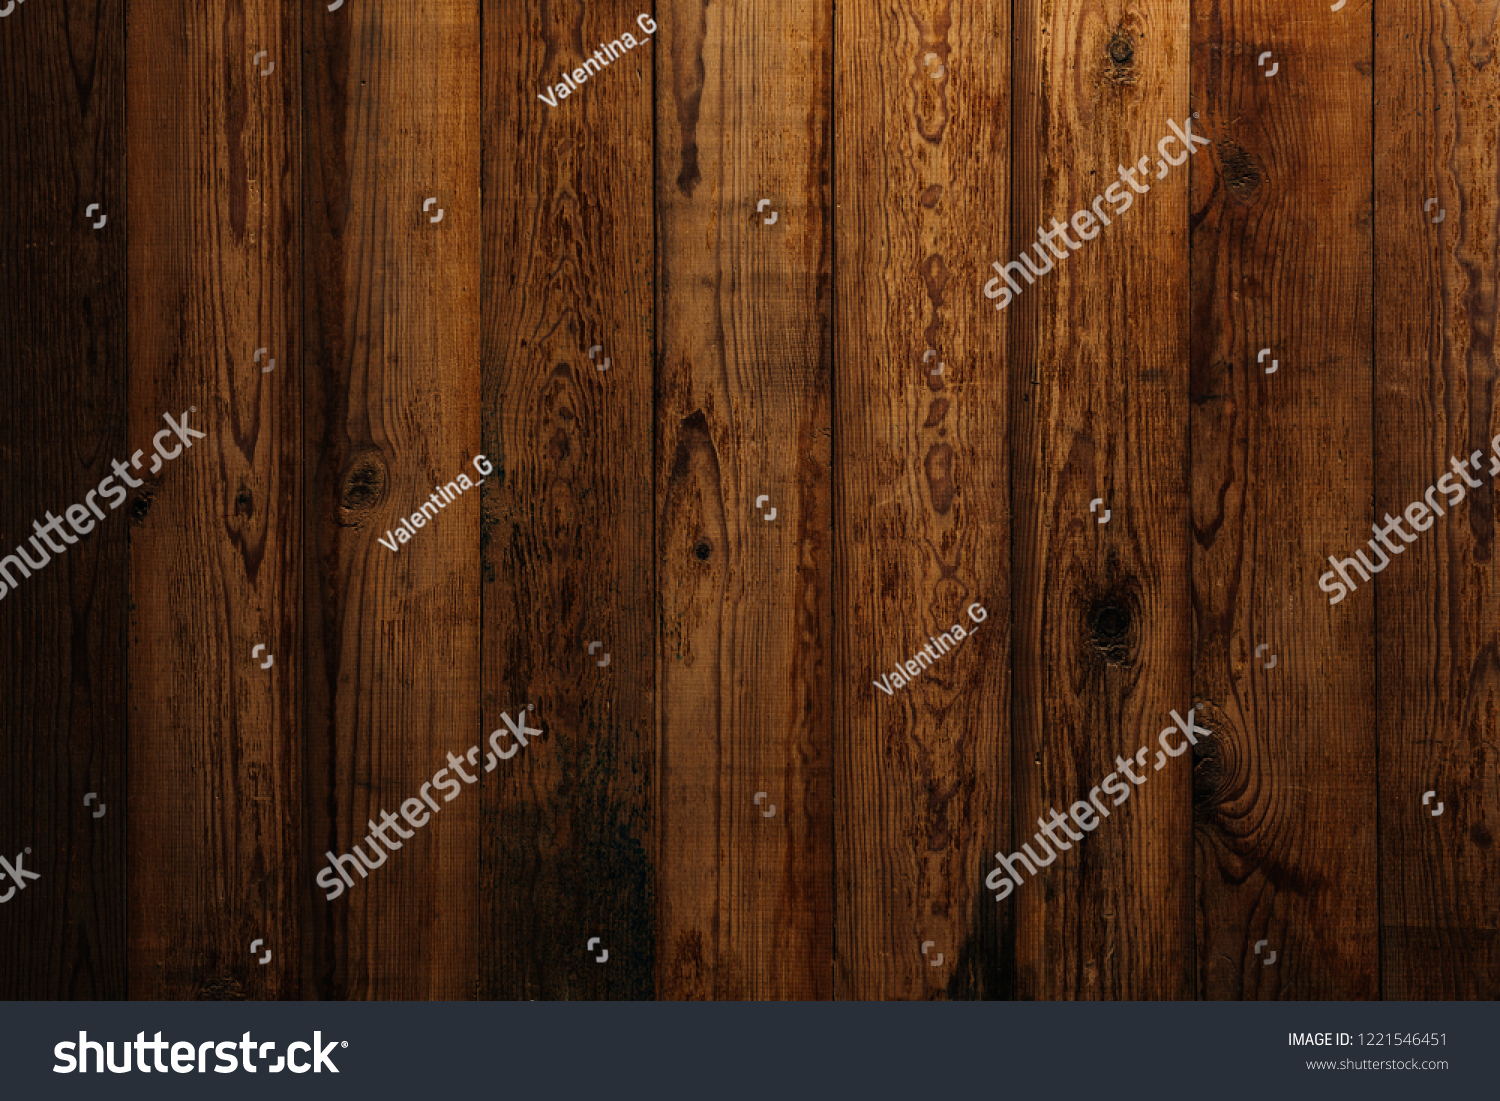 Old wooden boards. Wooden background with copy space. #1221546451